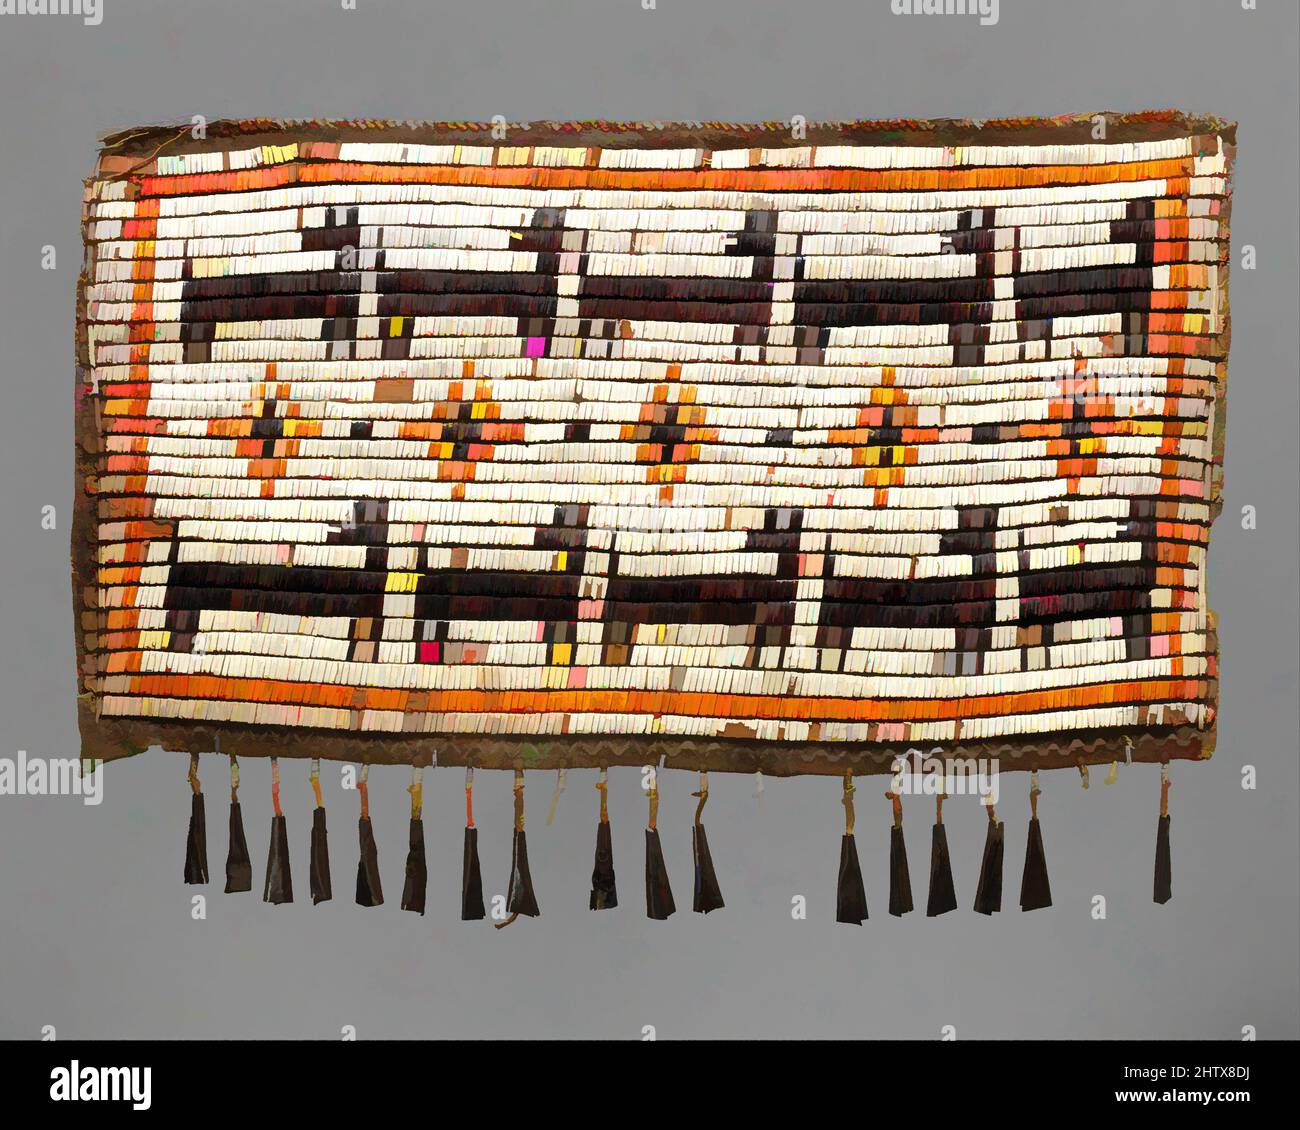 Art inspired by Cradleboard Cover Panel, 1810–30, United States, Minnesota or North Dakota or South Dakota, Eastern Sioux, Native-tanned skin, birchbark, quill, metal, H. 10 x W. 14 1/8 in. (25.4 x 35.9 cm), Barkcloth, Classic works modernized by Artotop with a splash of modernity. Shapes, color and value, eye-catching visual impact on art. Emotions through freedom of artworks in a contemporary way. A timeless message pursuing a wildly creative new direction. Artists turning to the digital medium and creating the Artotop NFT Stock Photo